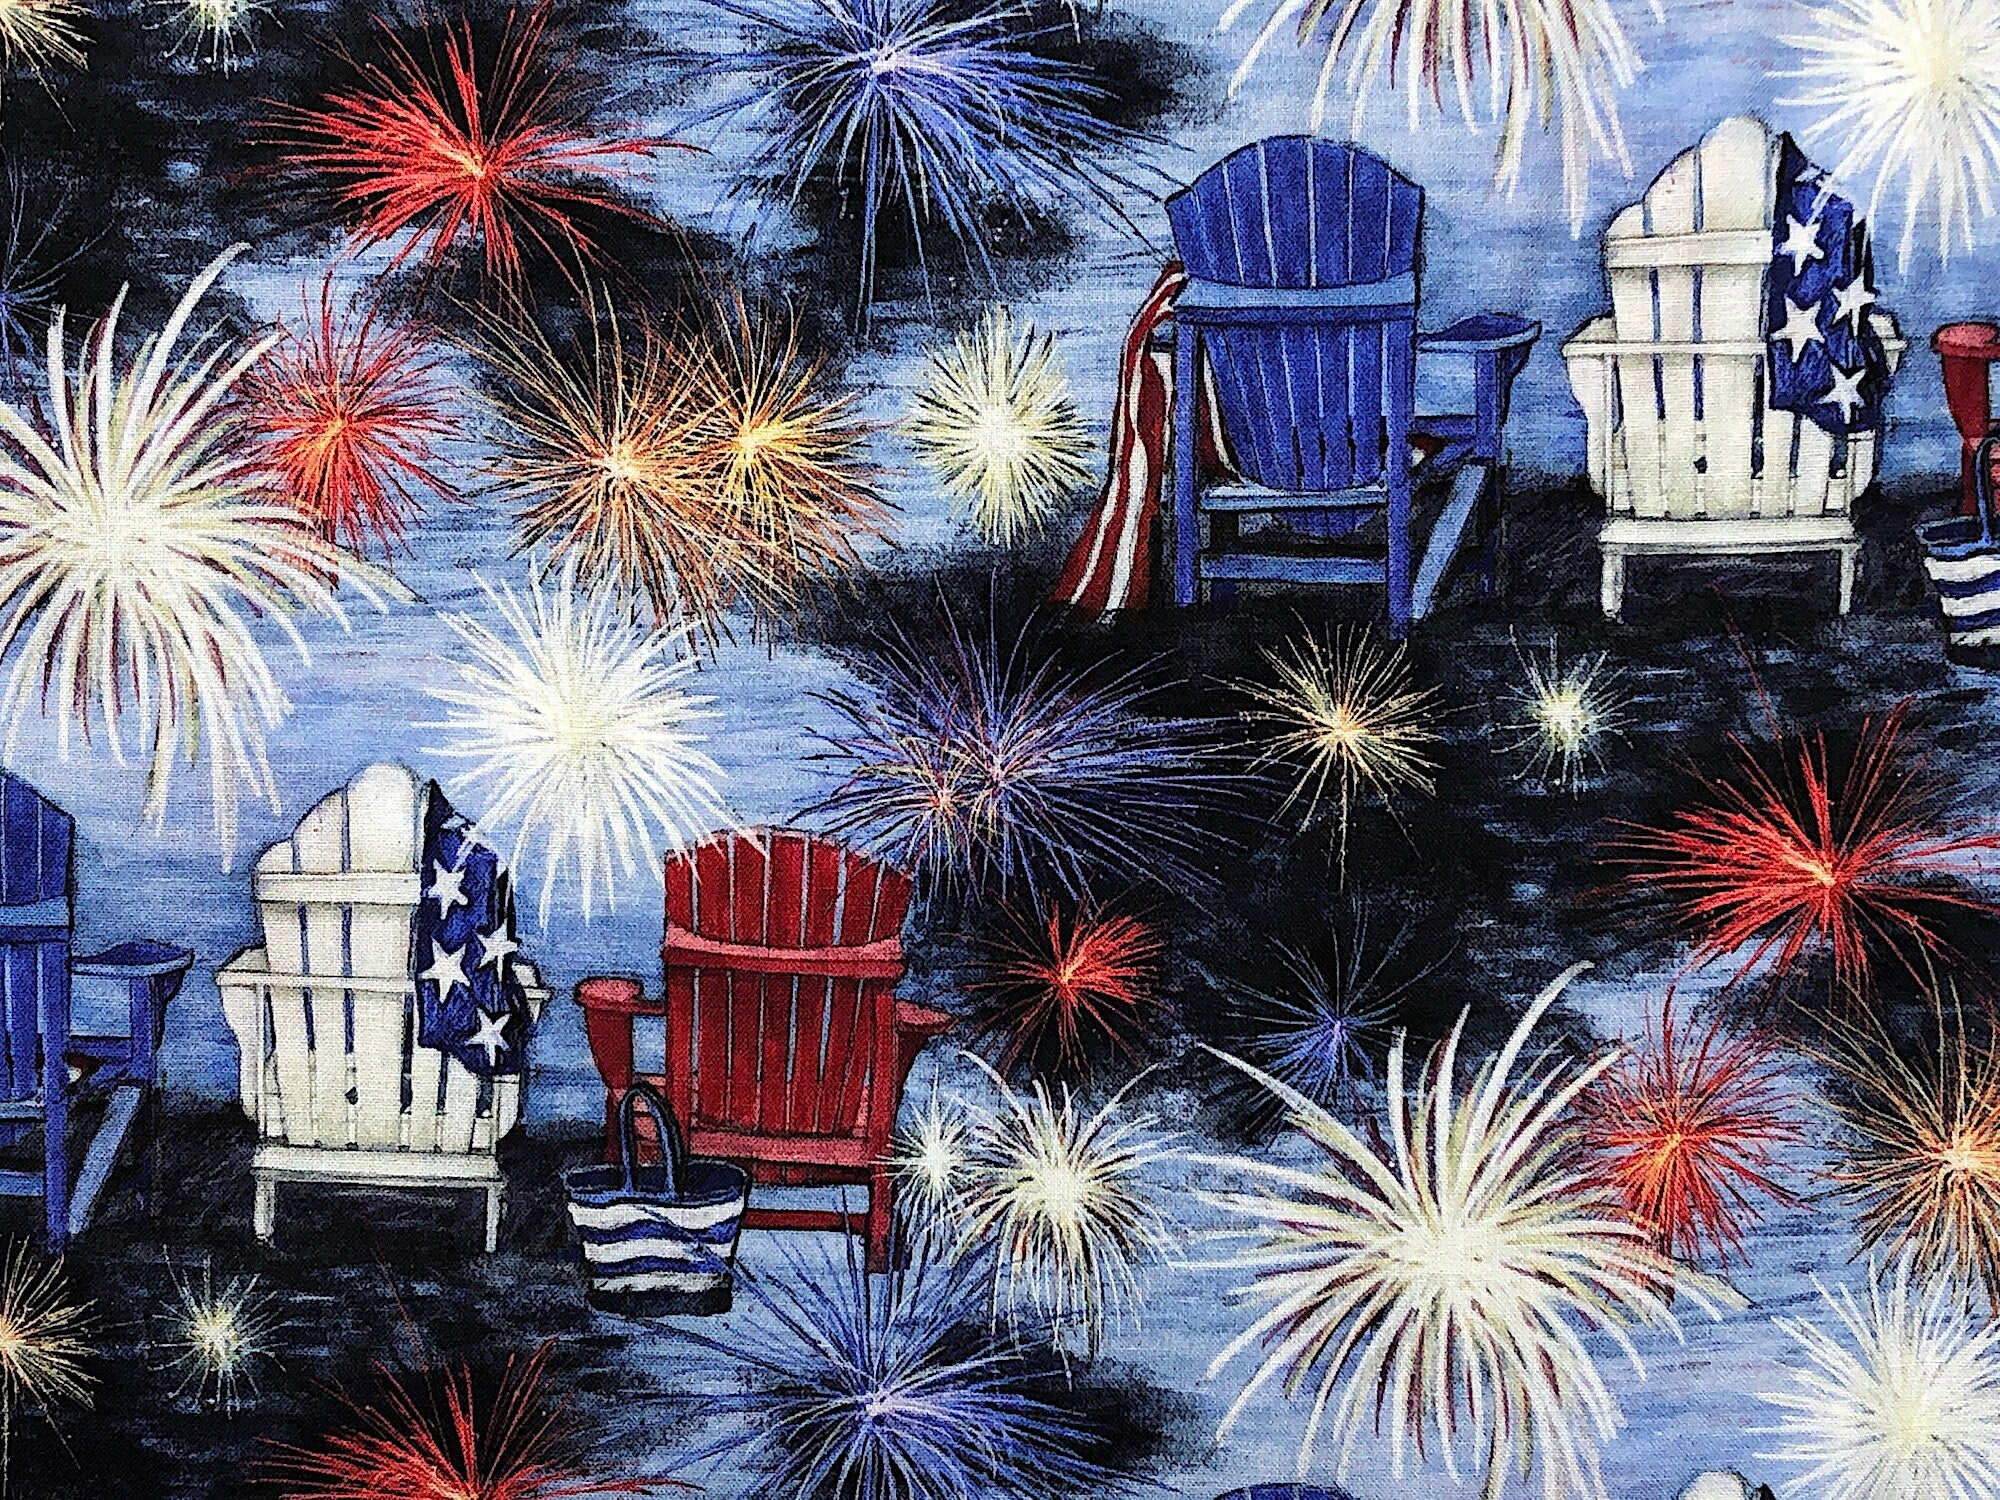 Close up of red, white and blue chairs and fireworks.